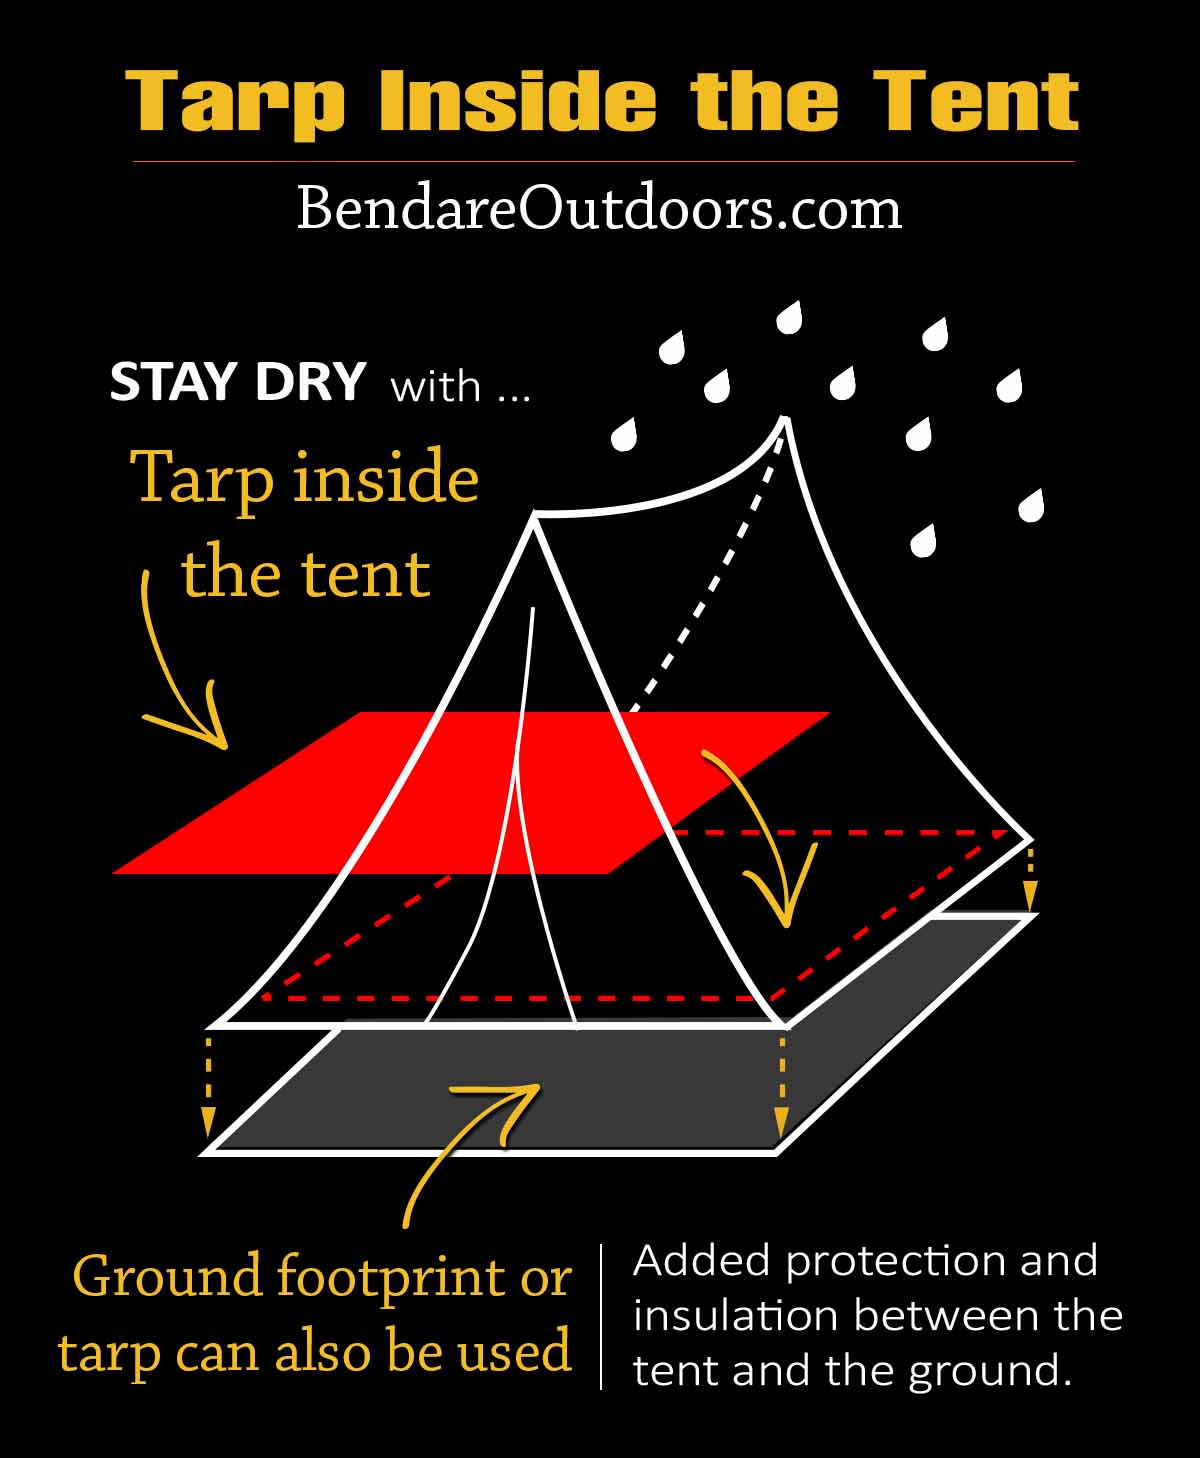 Guide to having tarp inside the tent by Bendare Outdoors